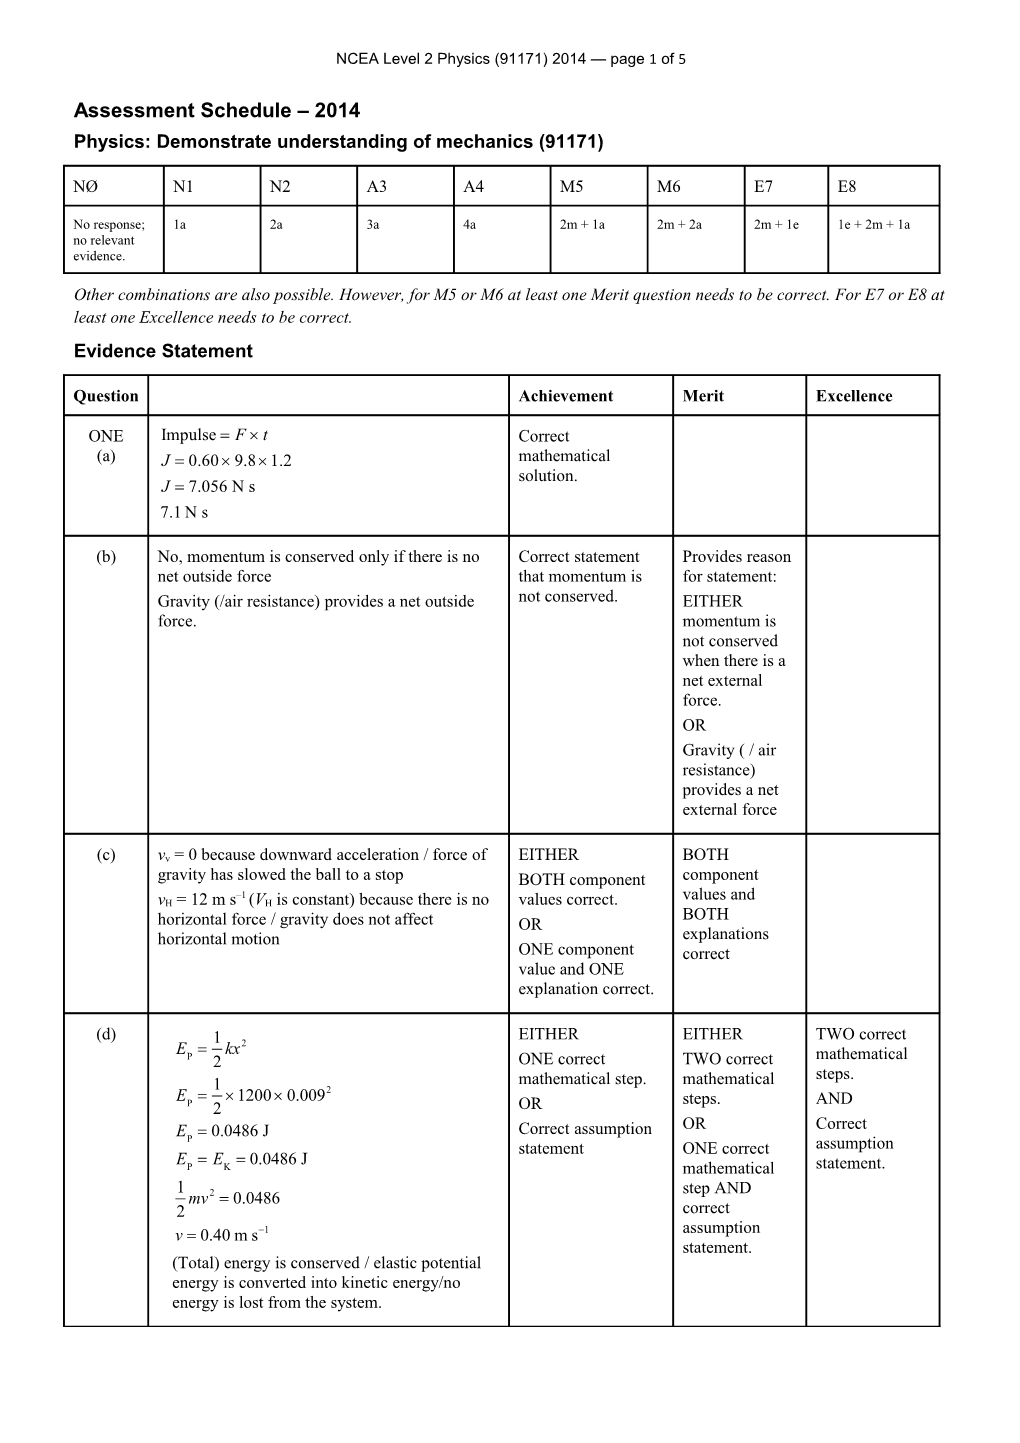 NCEA Level 2 Physics (91171) 2014 Assessment Schedule